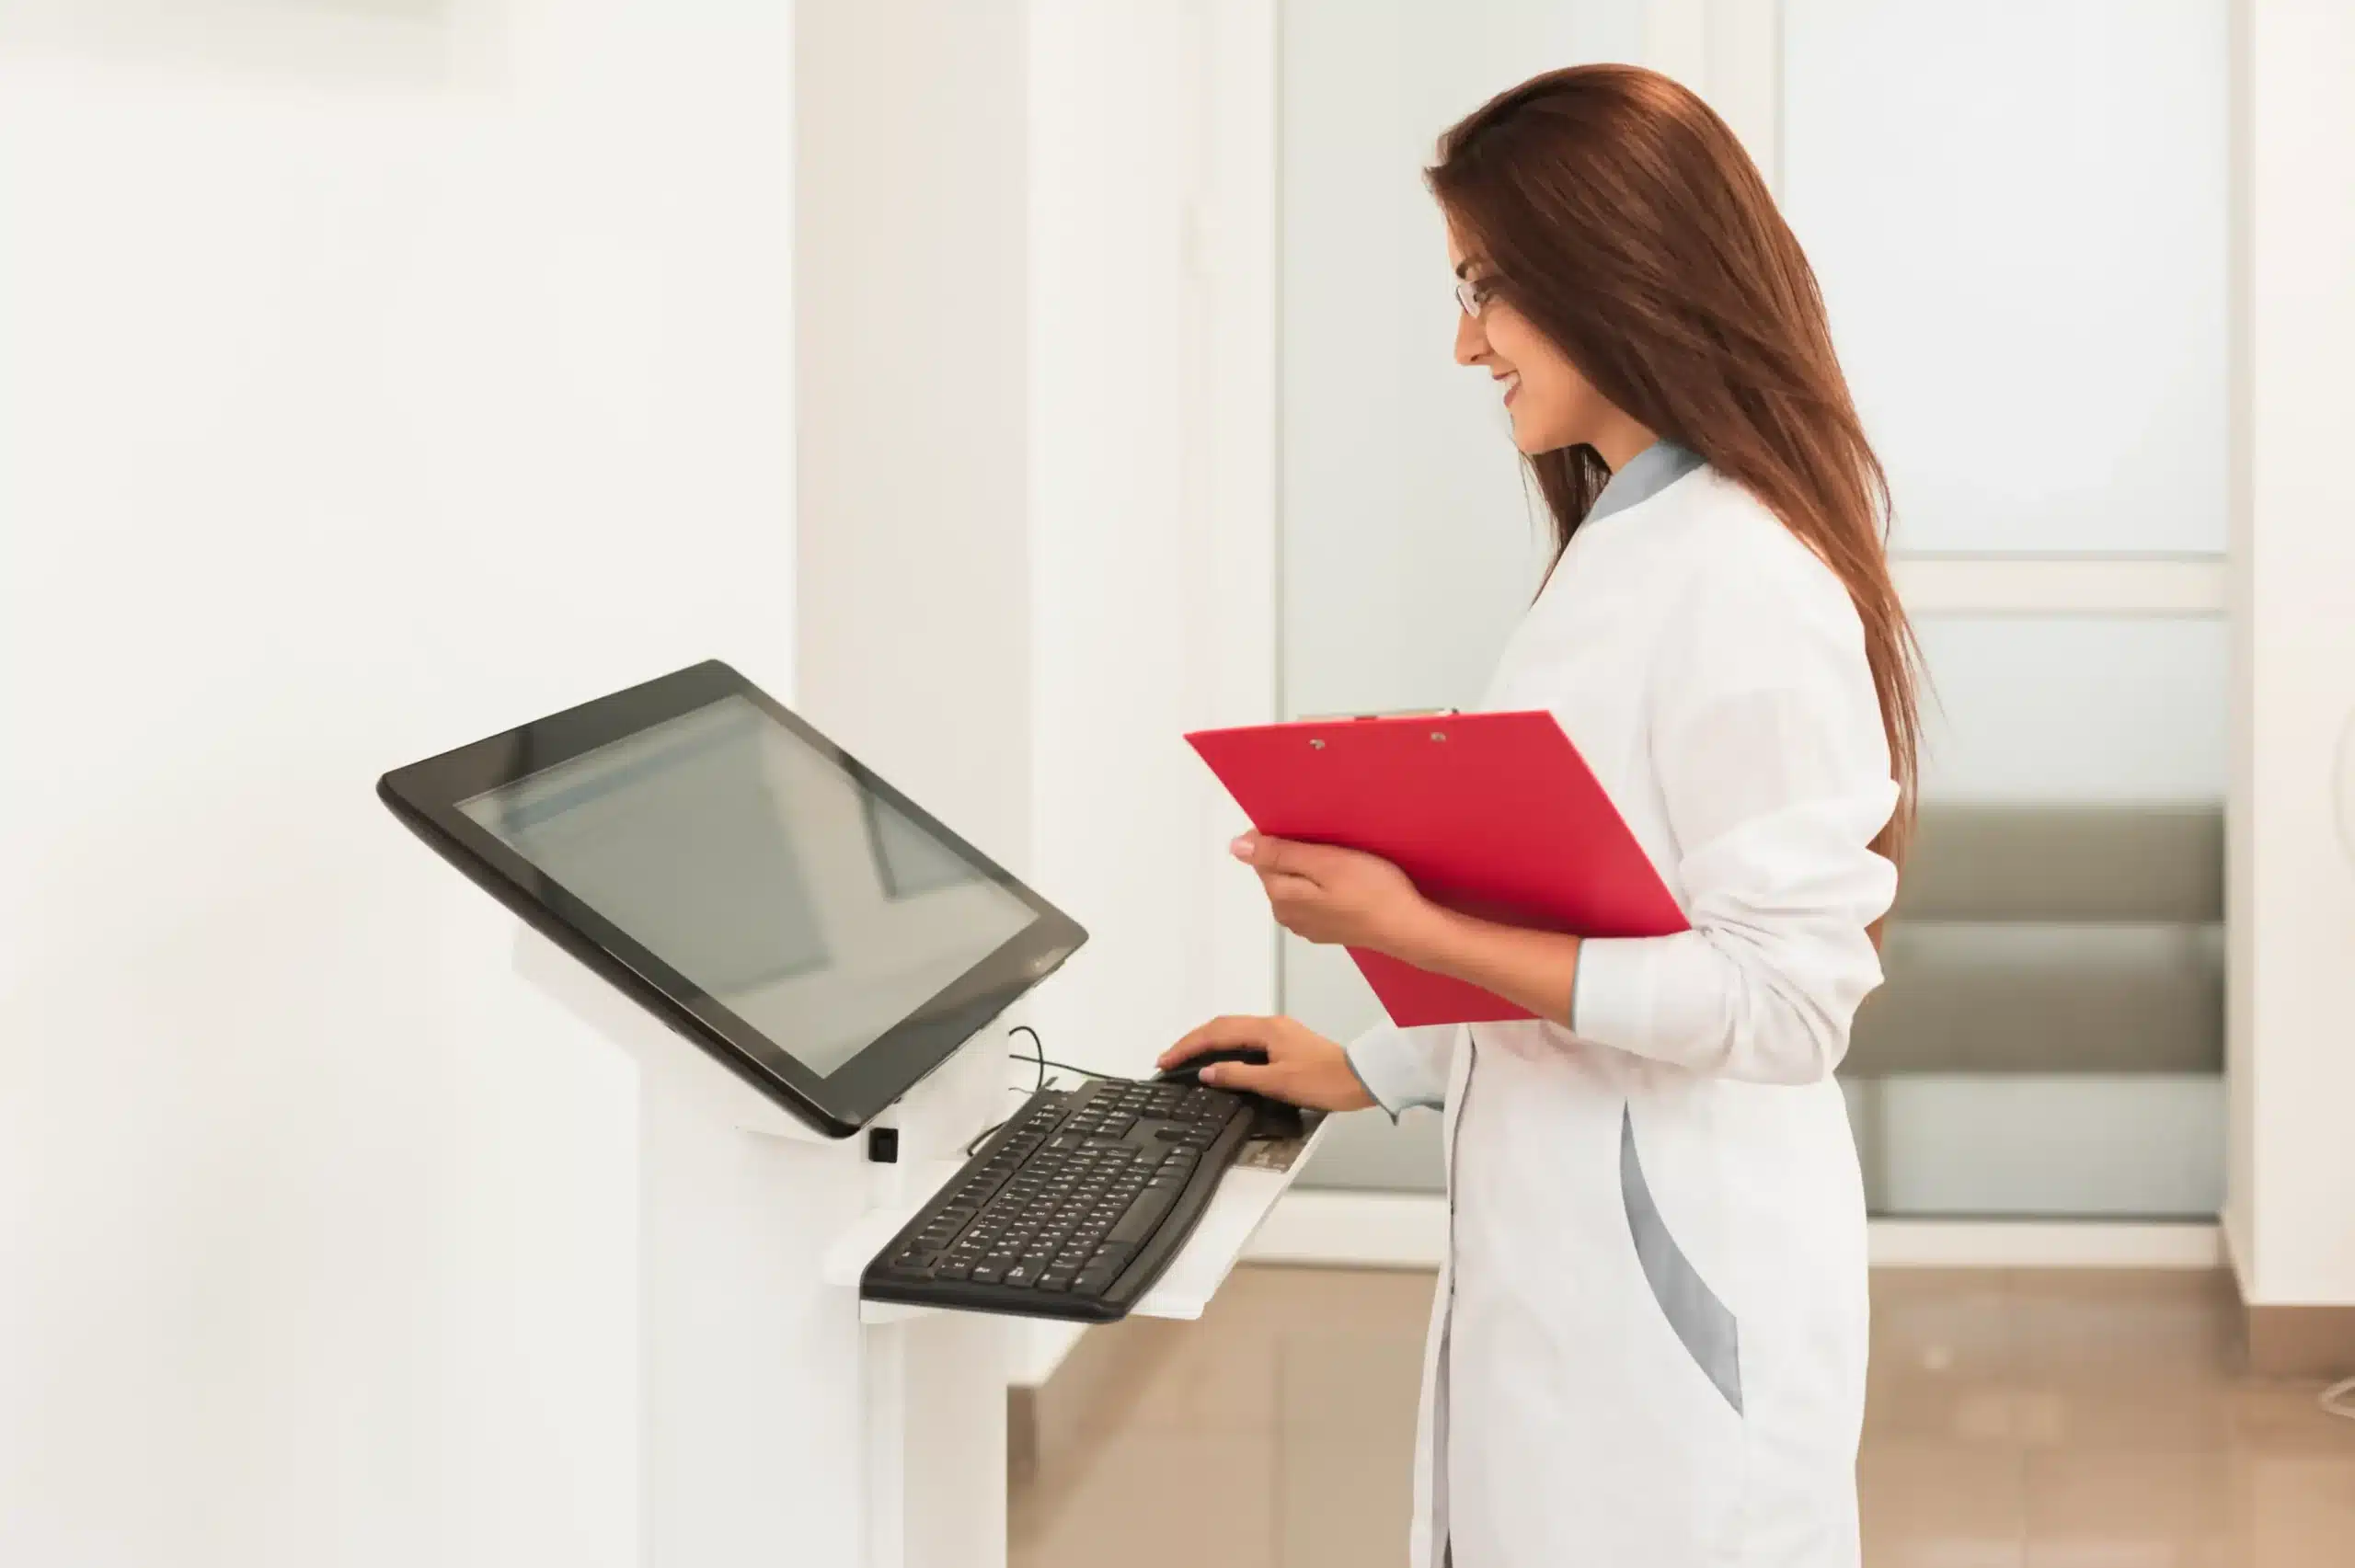 Biometric Kiosk Solution Healthcare: Streamlining Patient Check-In/Out